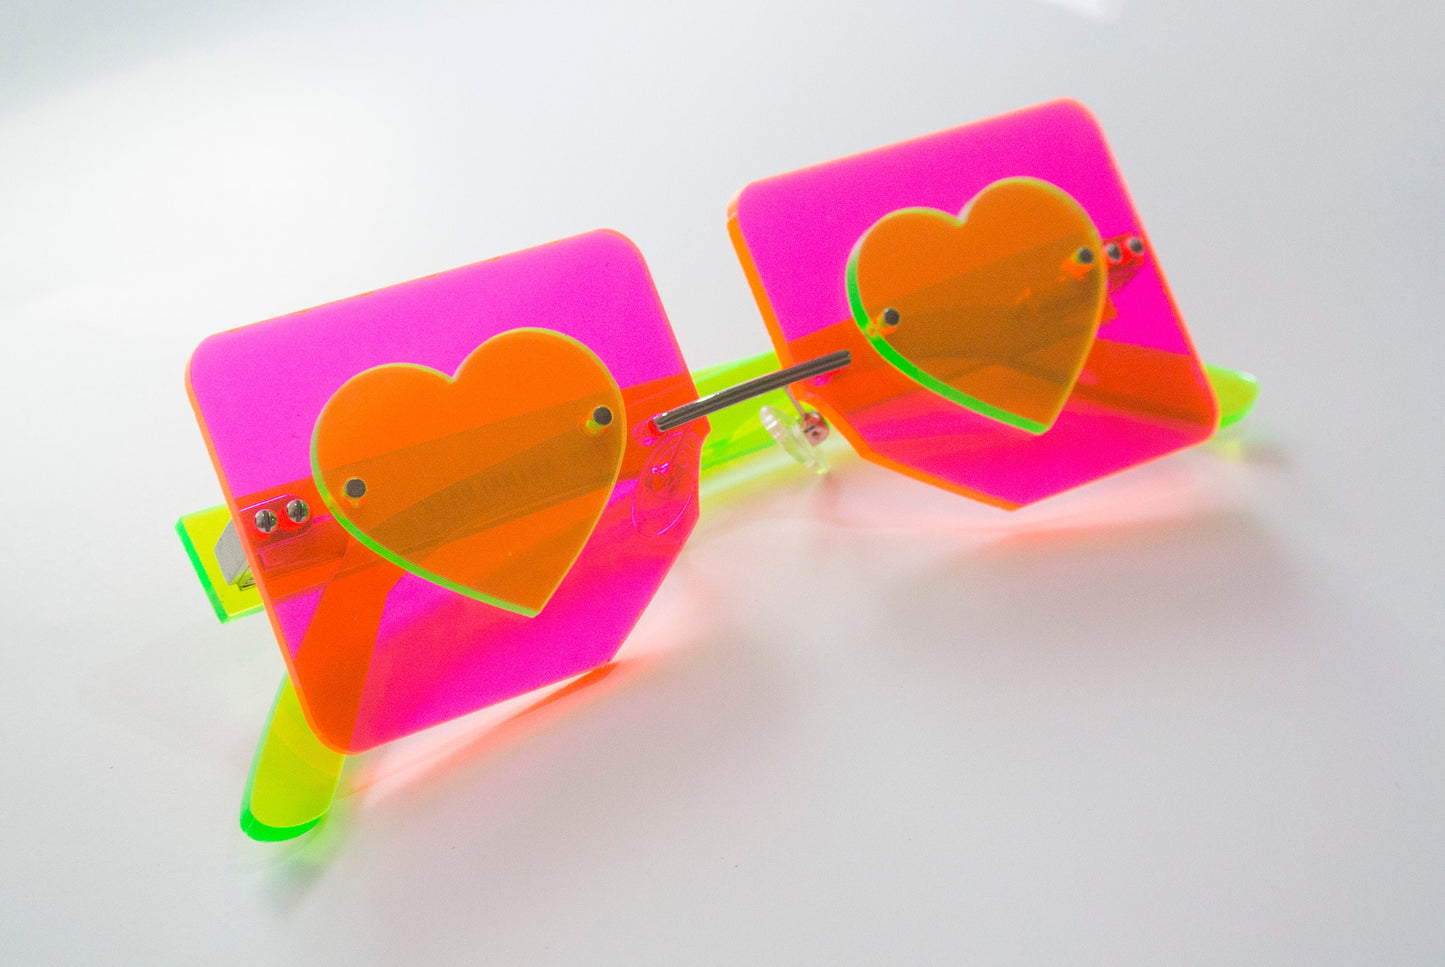 Groovy baby heart G_IRL Zine colab glasses